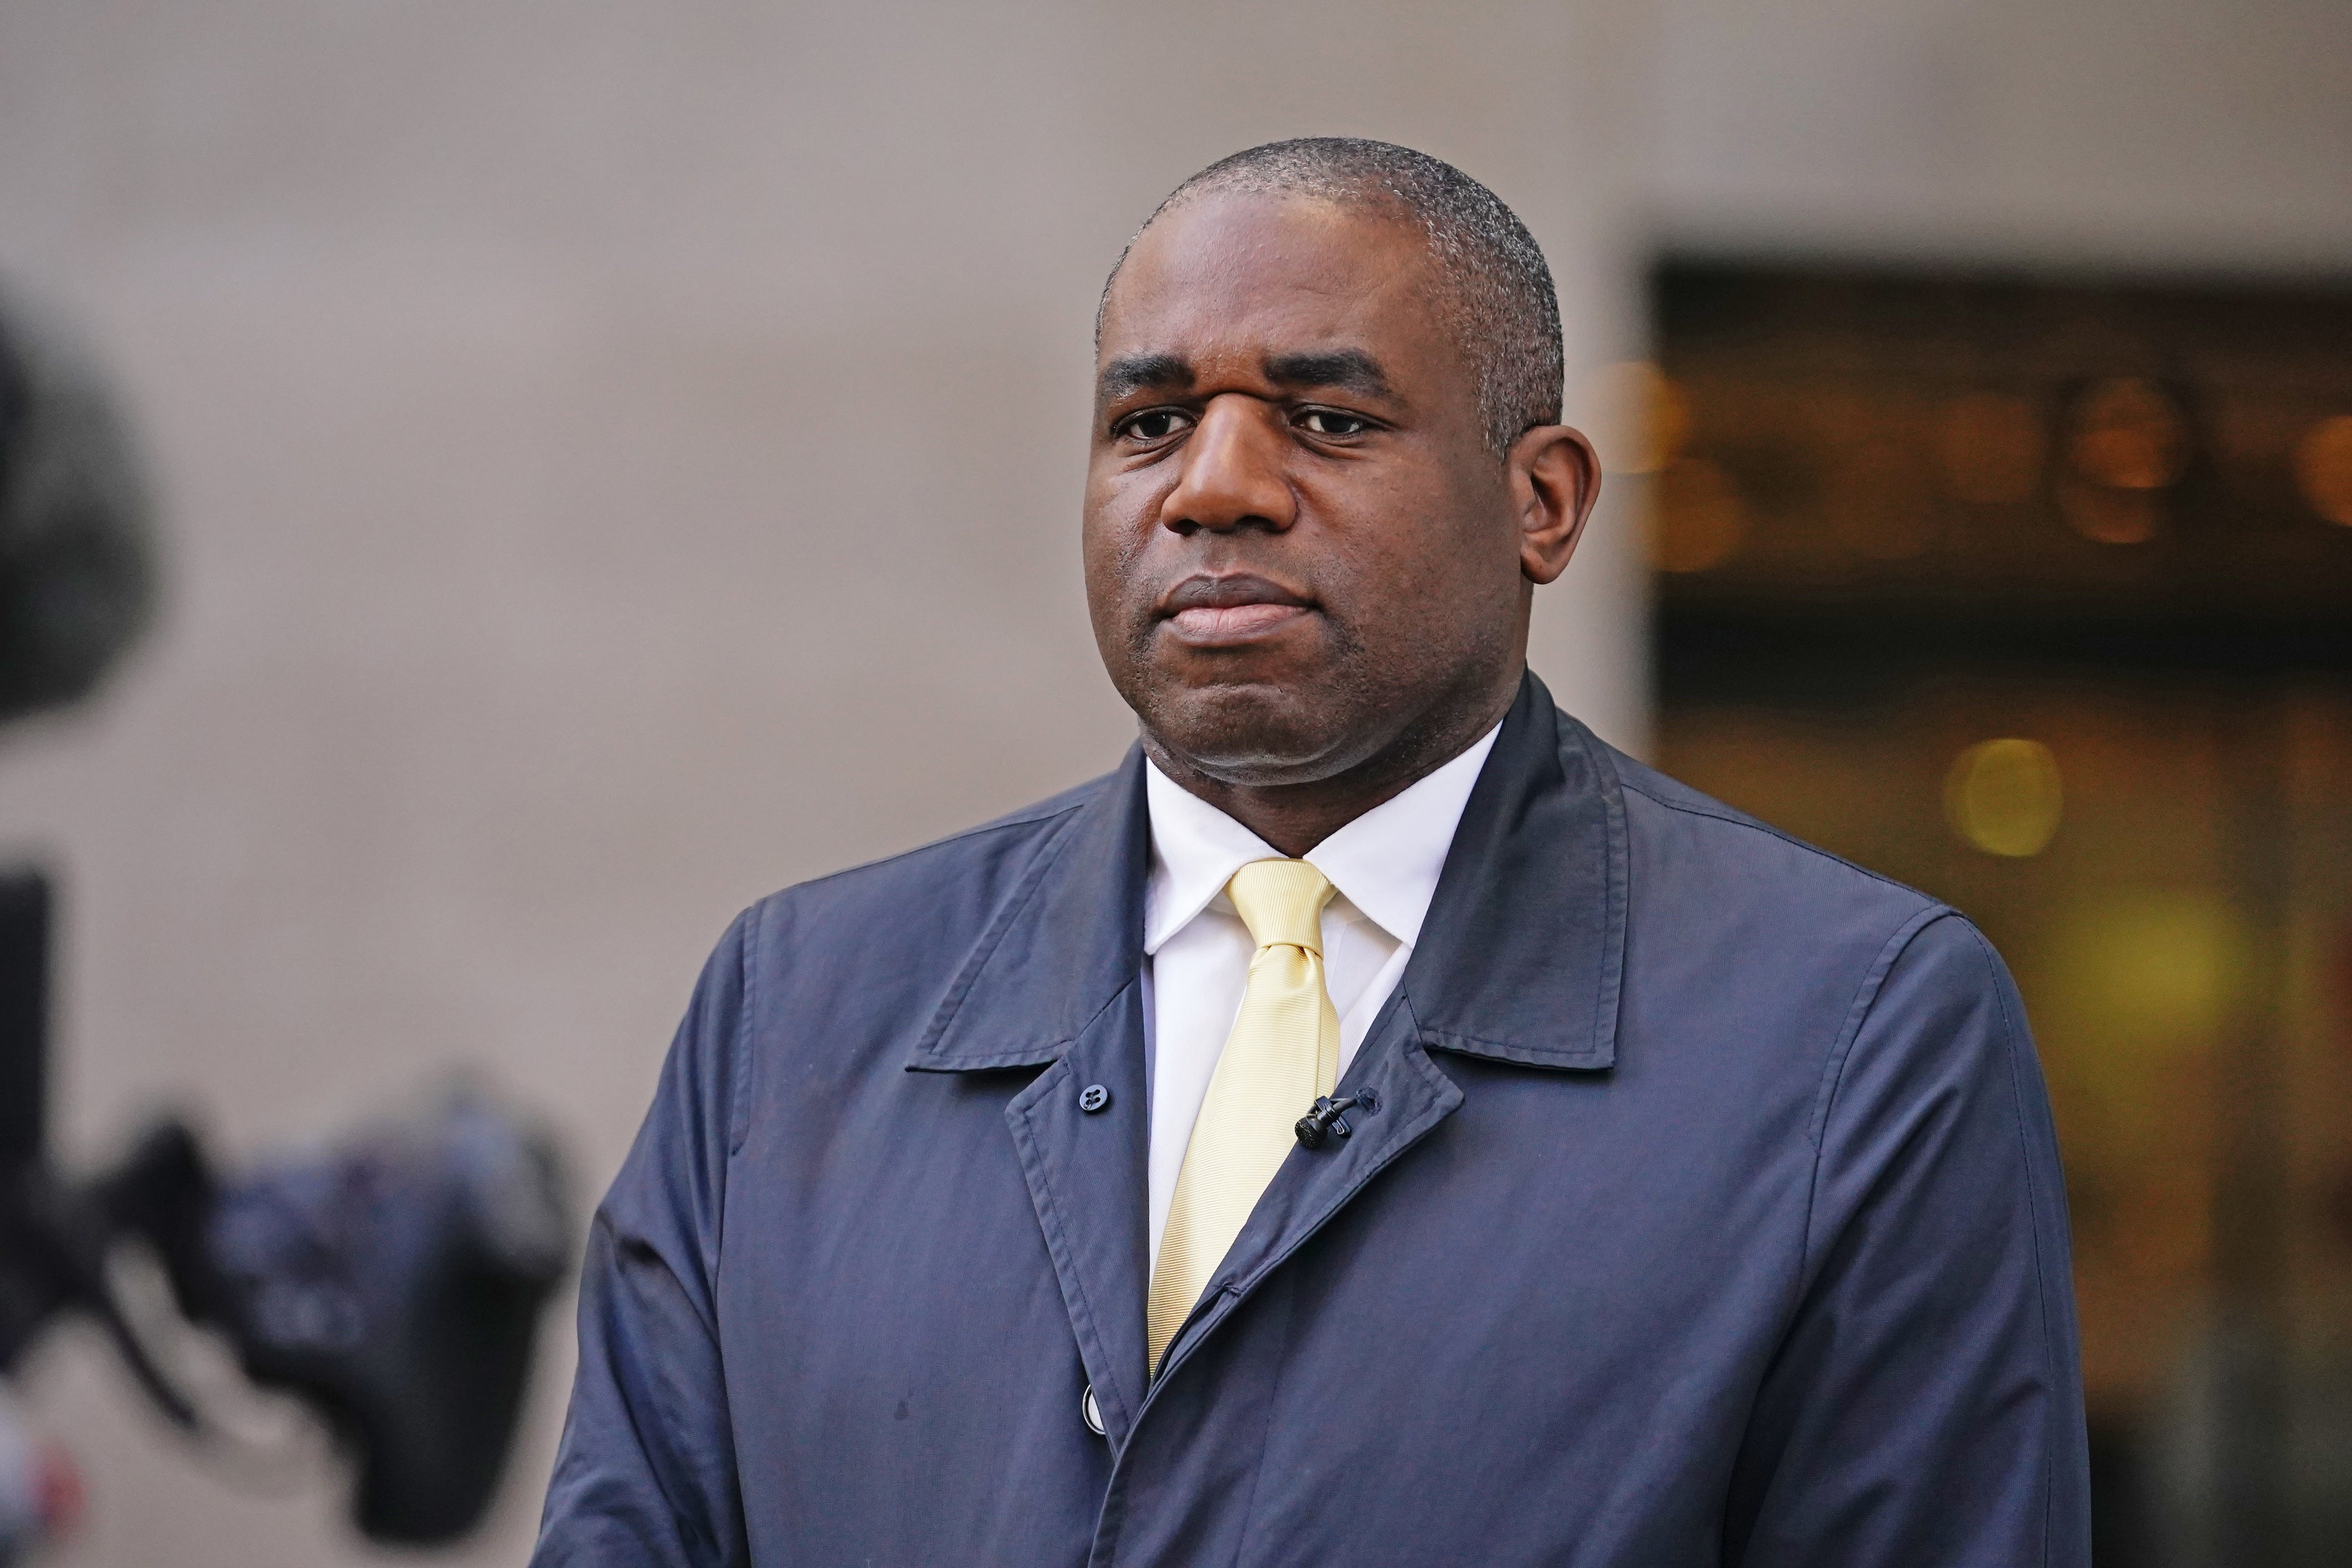 Shadow foreign secretary David Lammy arrives at BBC Broadcasting House in London, to appear on the BBC One current affairs programme, Sunday Morning. Picture date: Sunday February 27, 2022 (Aaron Chown/PA)